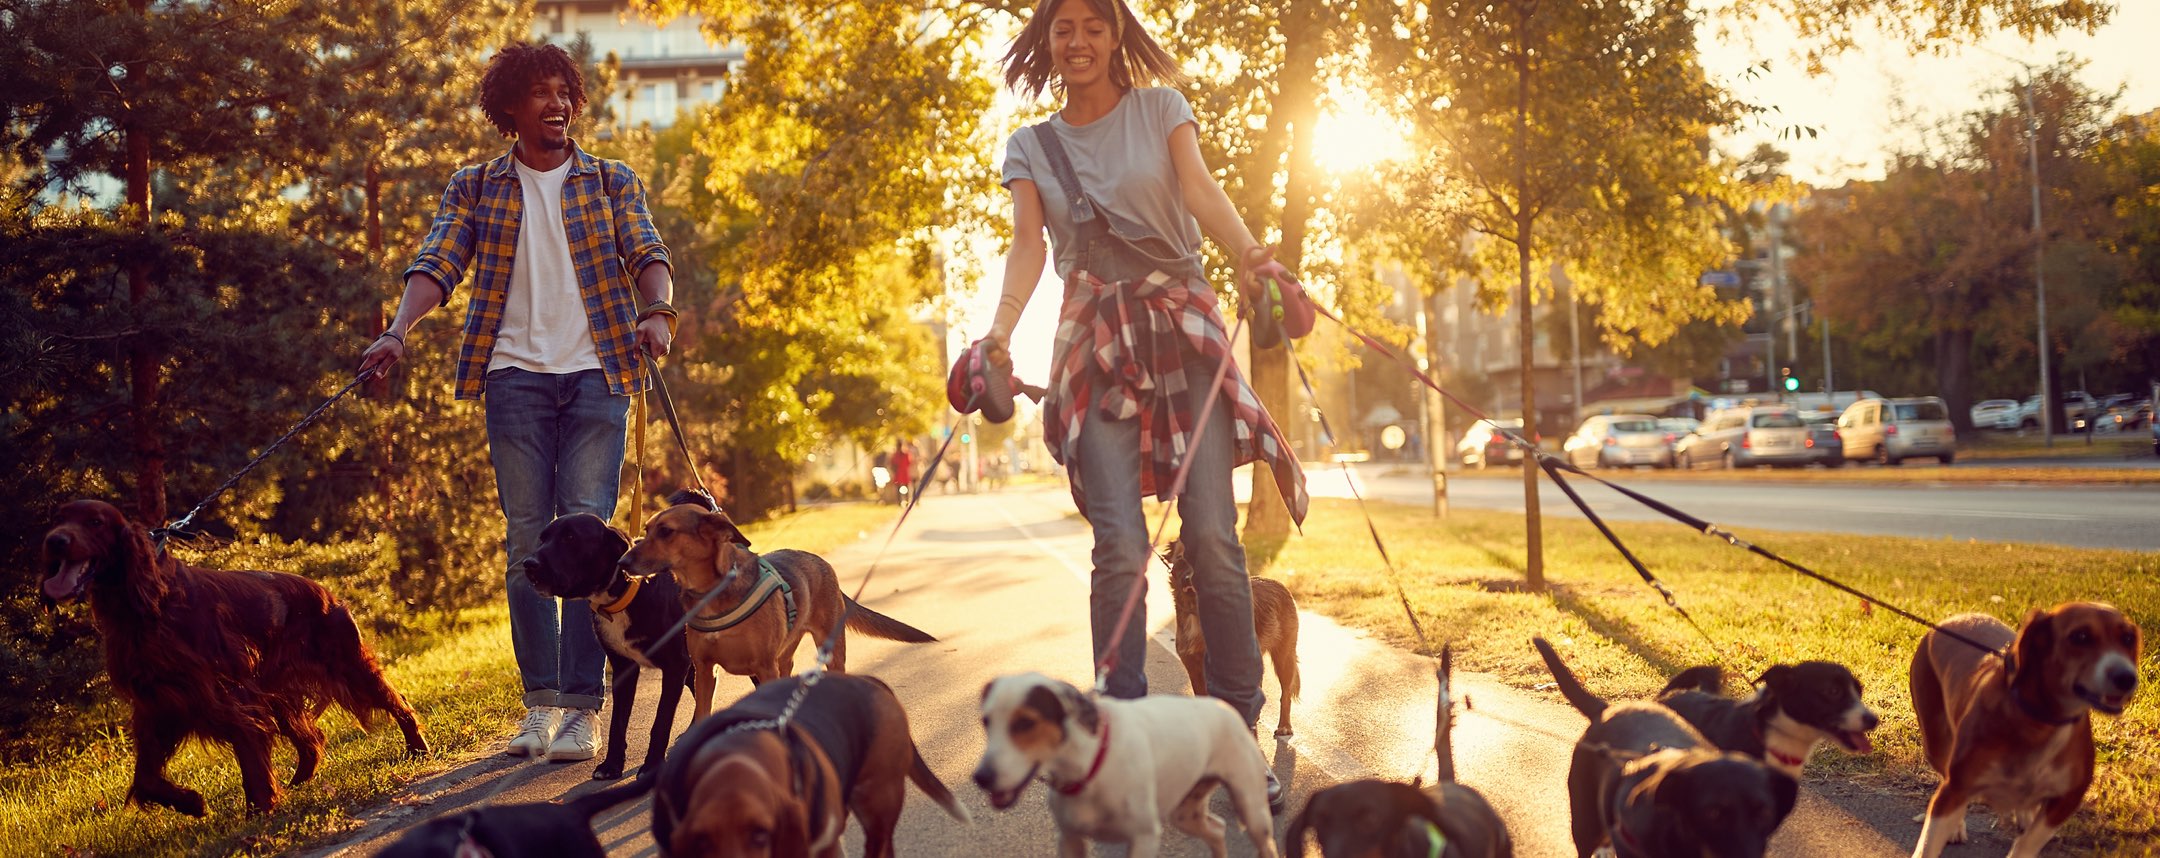 Girl walking with several dogs on leashes